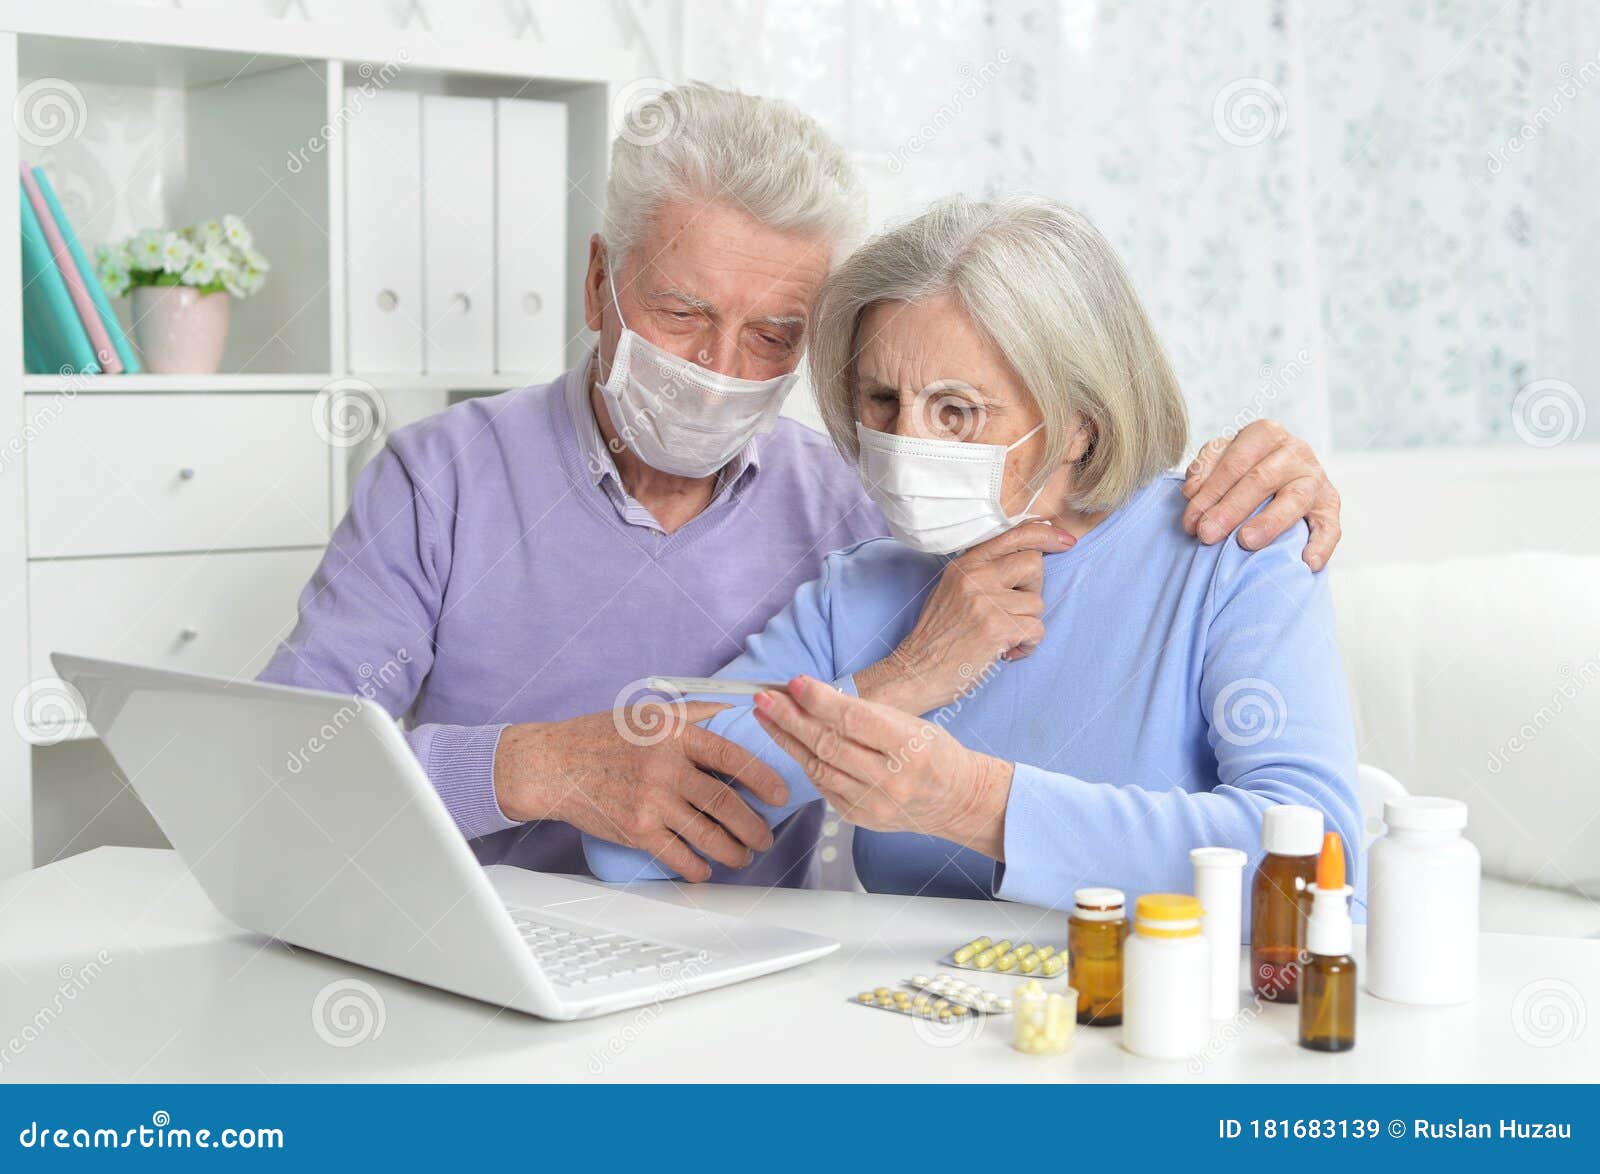 Ill Senior Couple with Facial Masks Using Laptop Stock Image - Image of ...